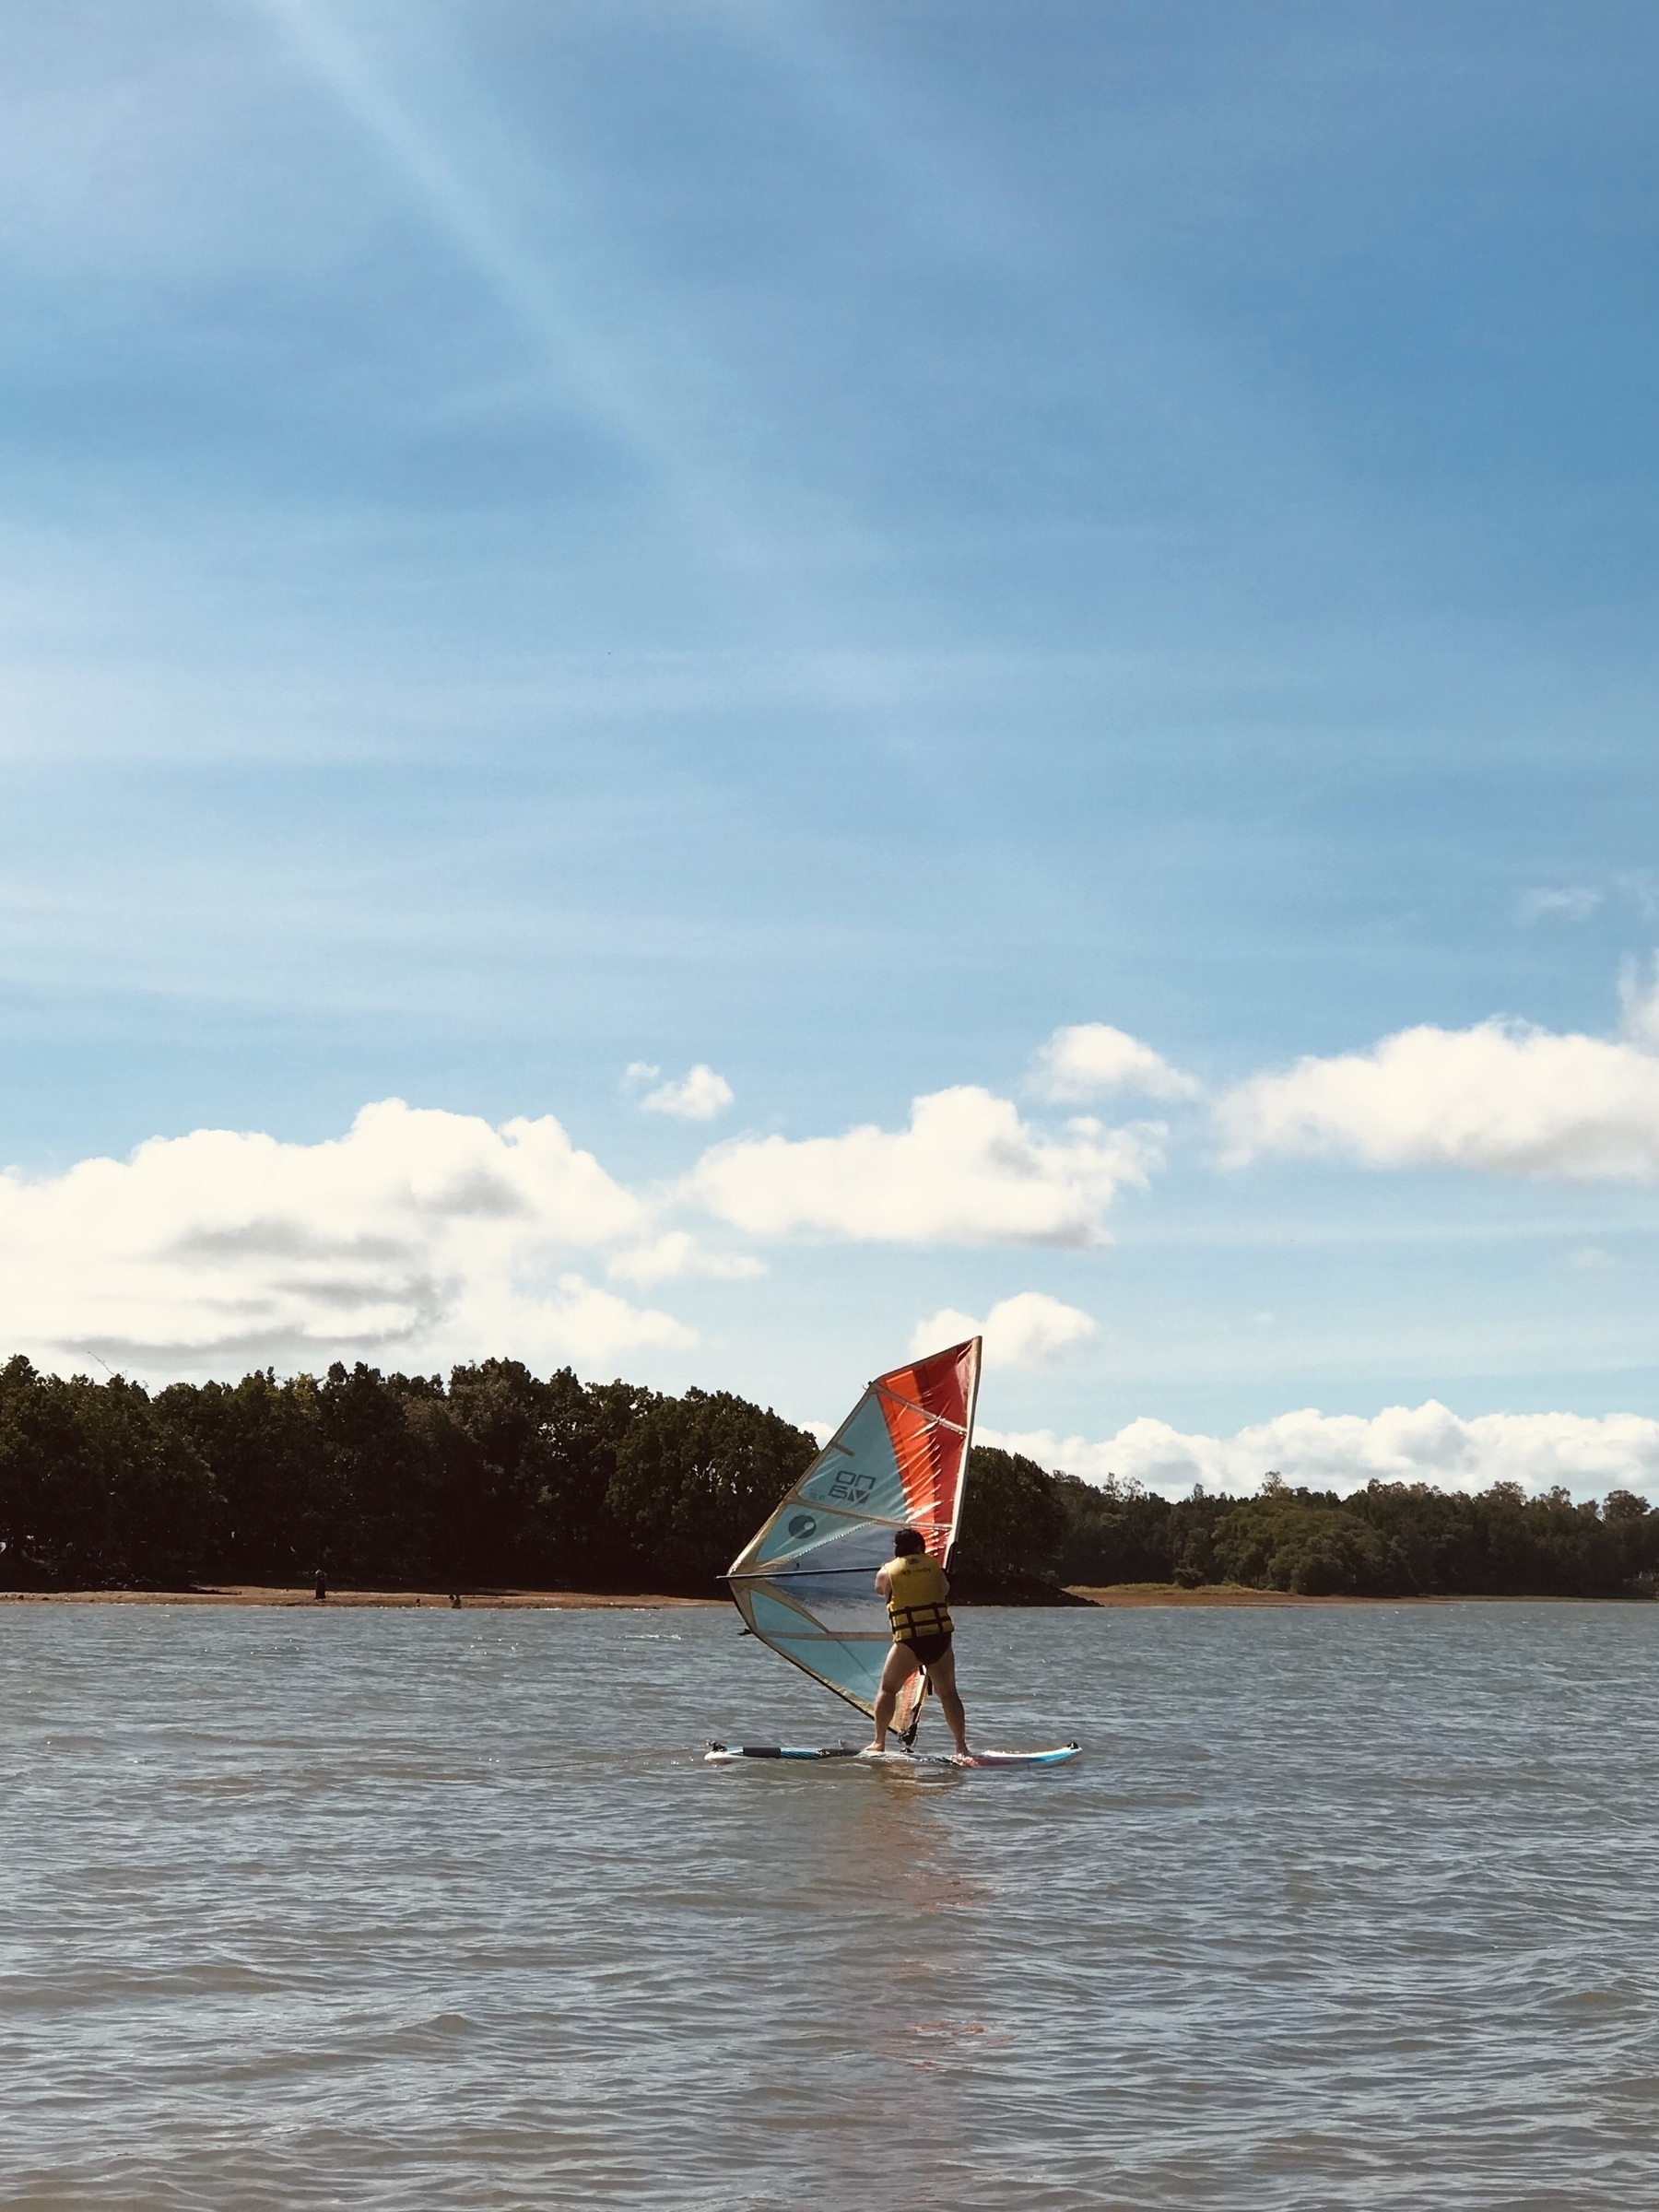 Chi is controlling a windsurfer going to the right of the point-of-view while in the middle of Caliraya Lake in Laguna. The blue sky takes up majority of the shot, with a few clouds and some sun rays visible. In the background, a forest can be seen lining up right before the shore that draws a line in the middle of the shot.